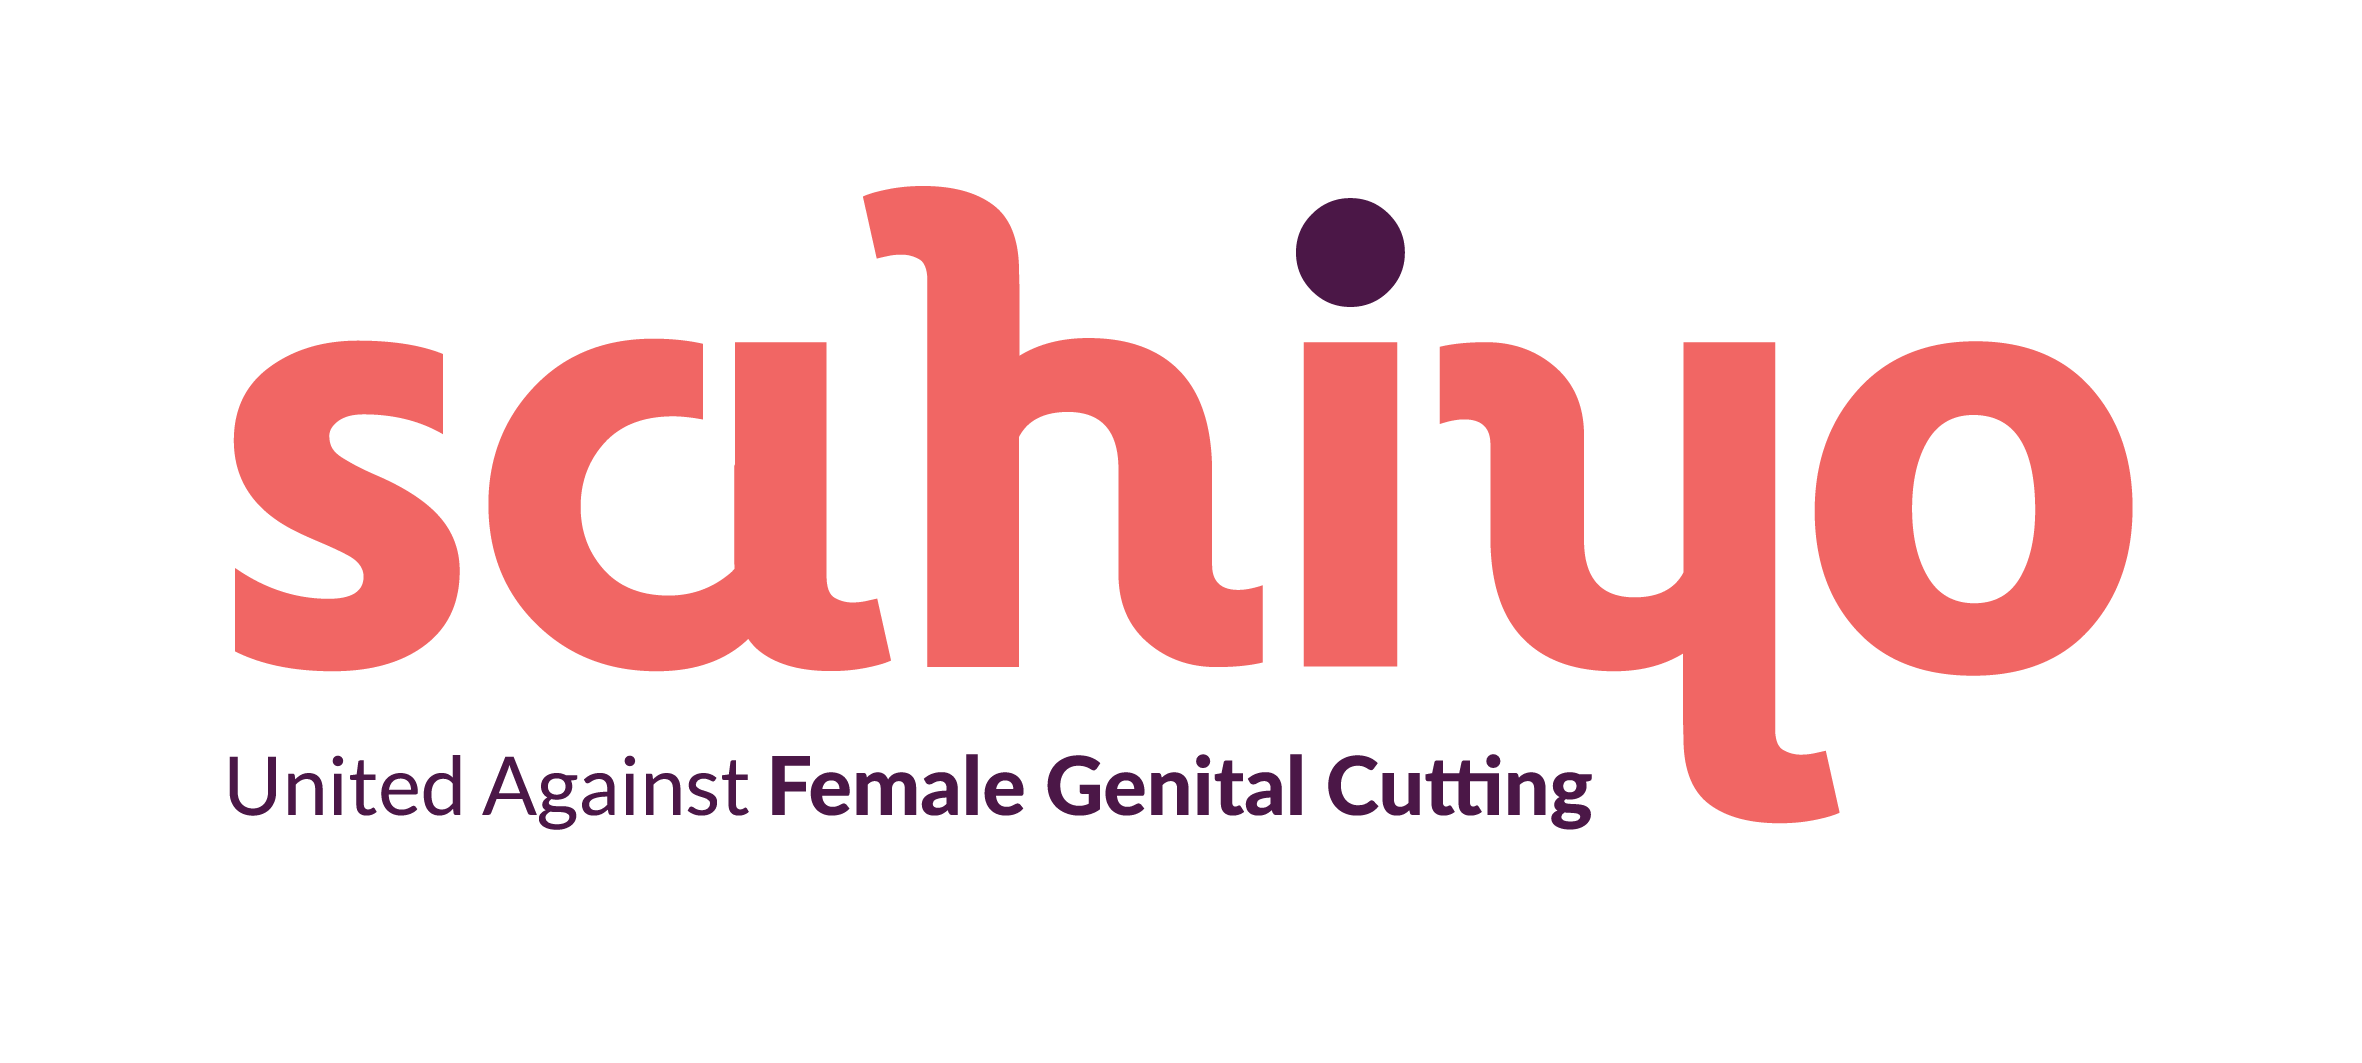 31 US States Now Have Laws Against Female Genital Cutting, But Government Will Not Appeal in the Federal Michigan Case